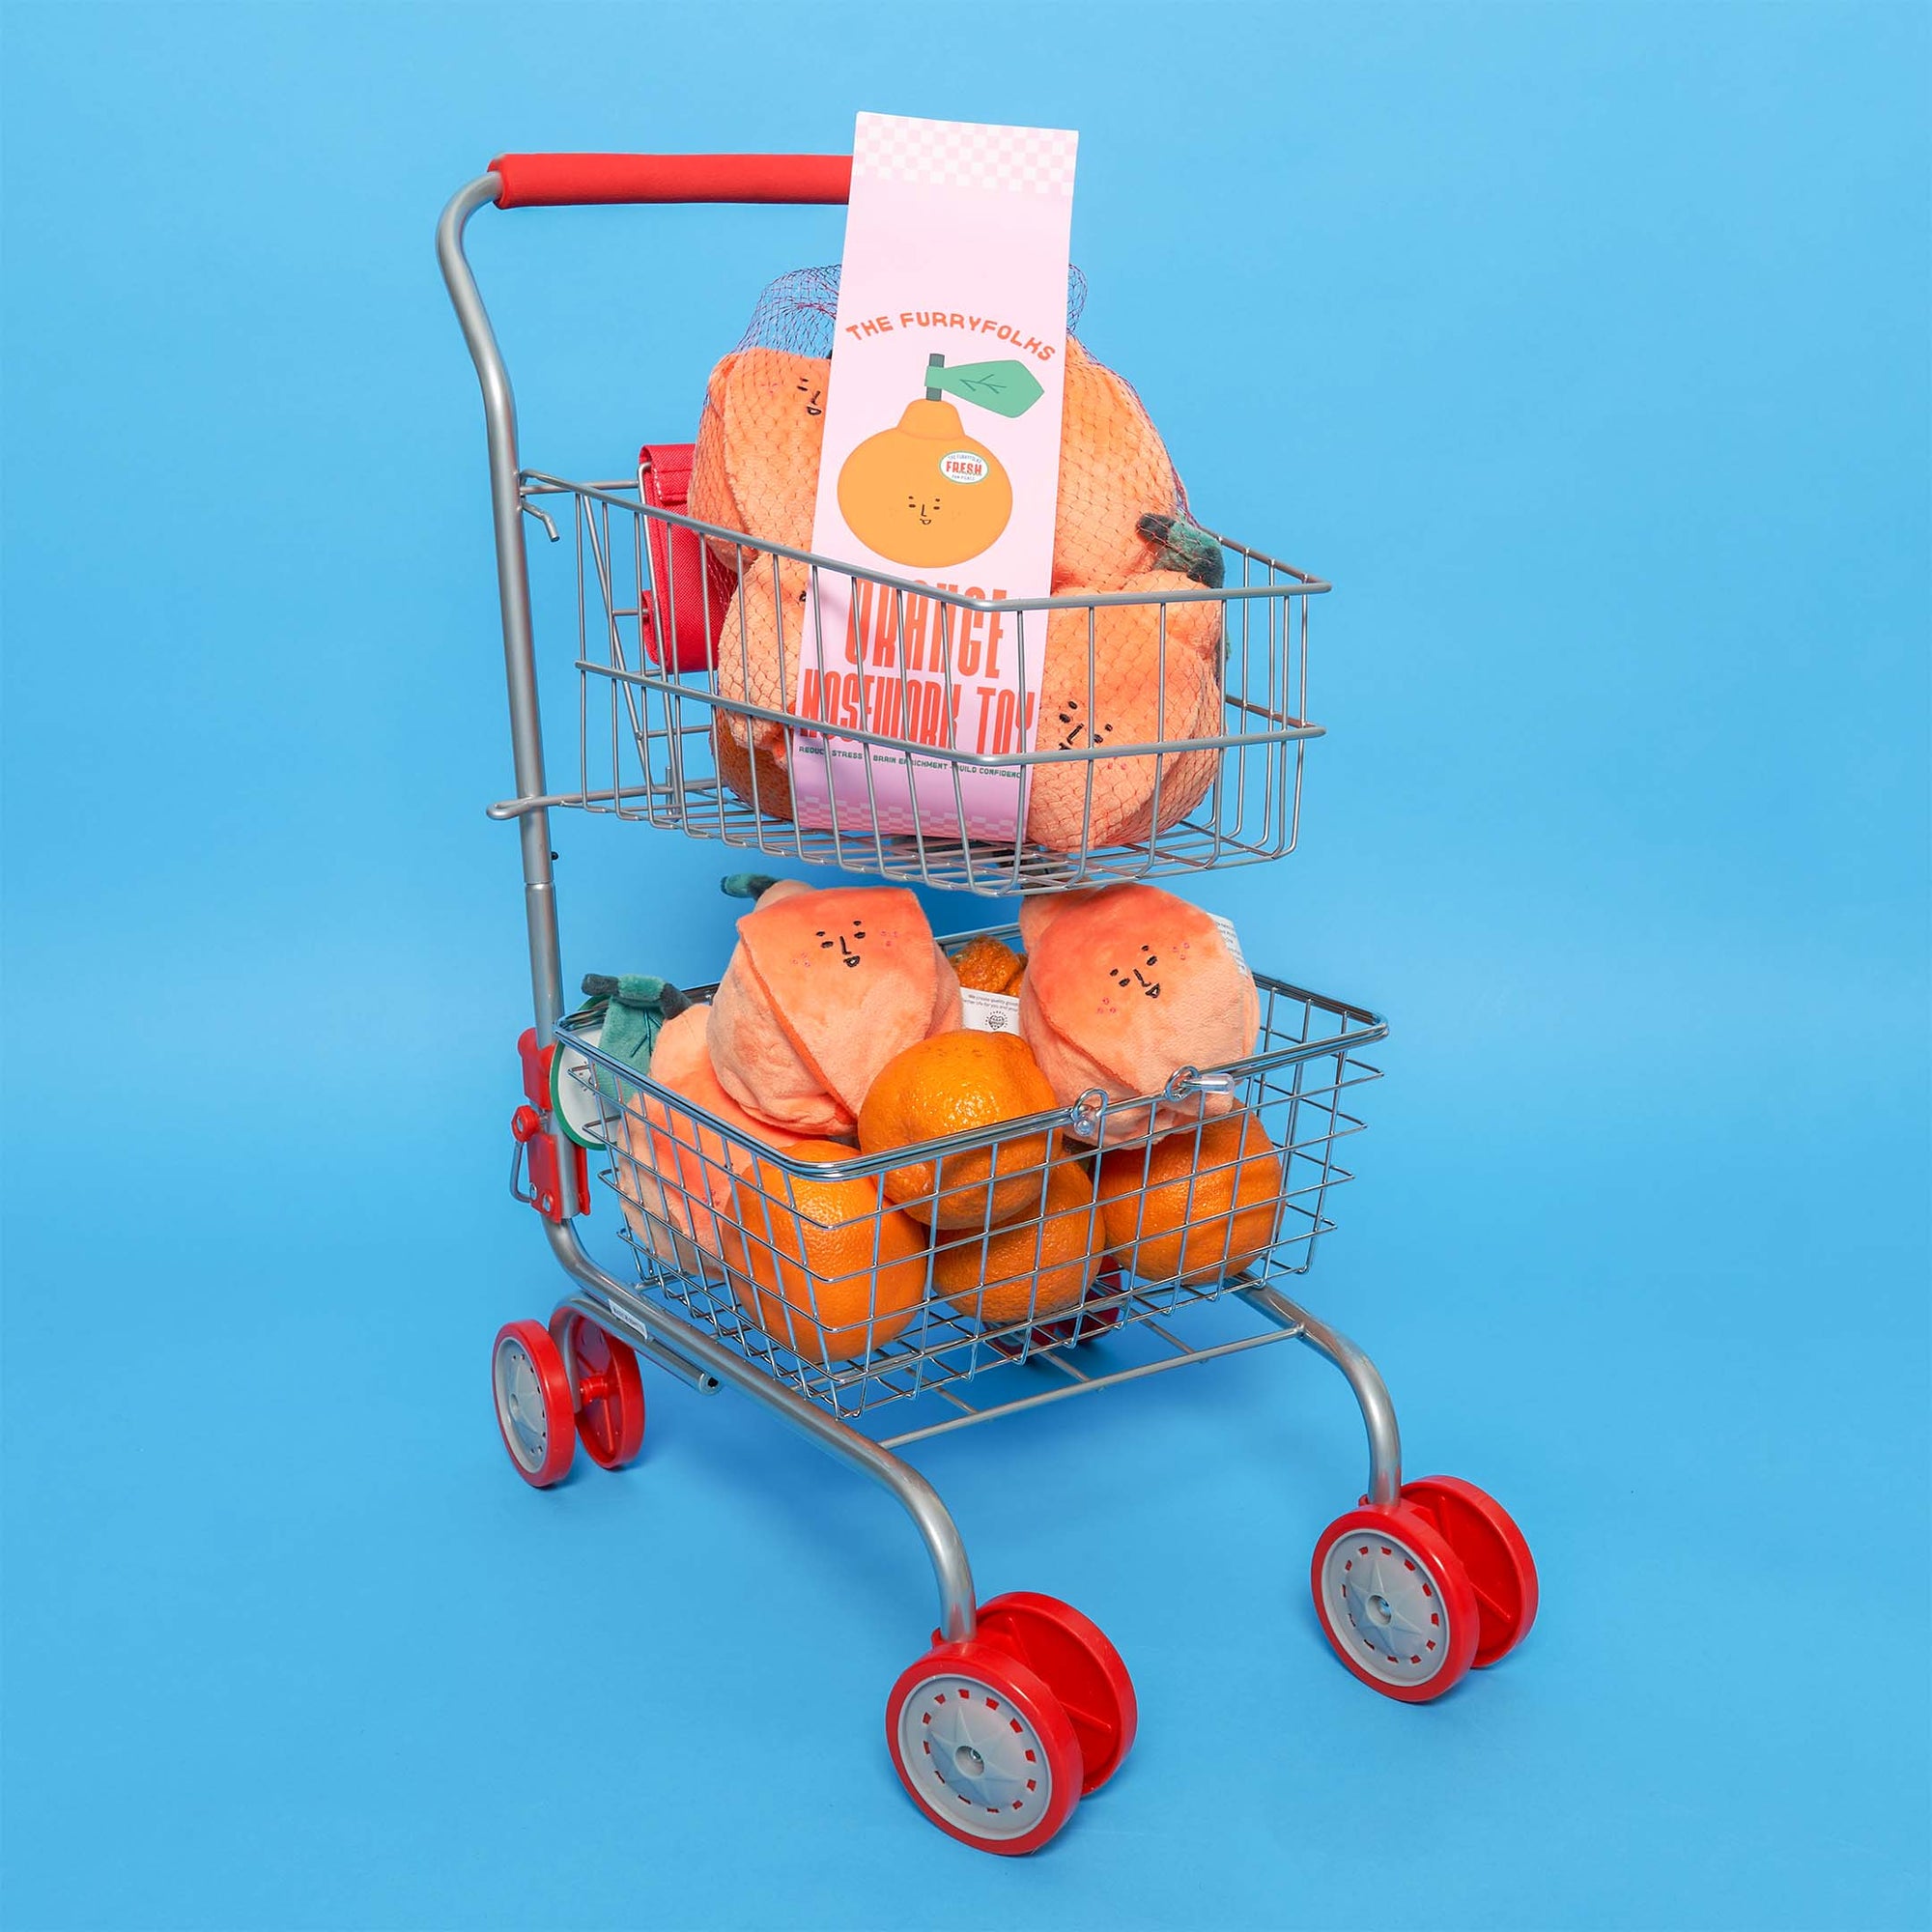 A miniature shopping cart filled with orange-shaped dog toys and oranges, with a label reading "The Furryfolks Orange Nosework Toy", set against a blue background.